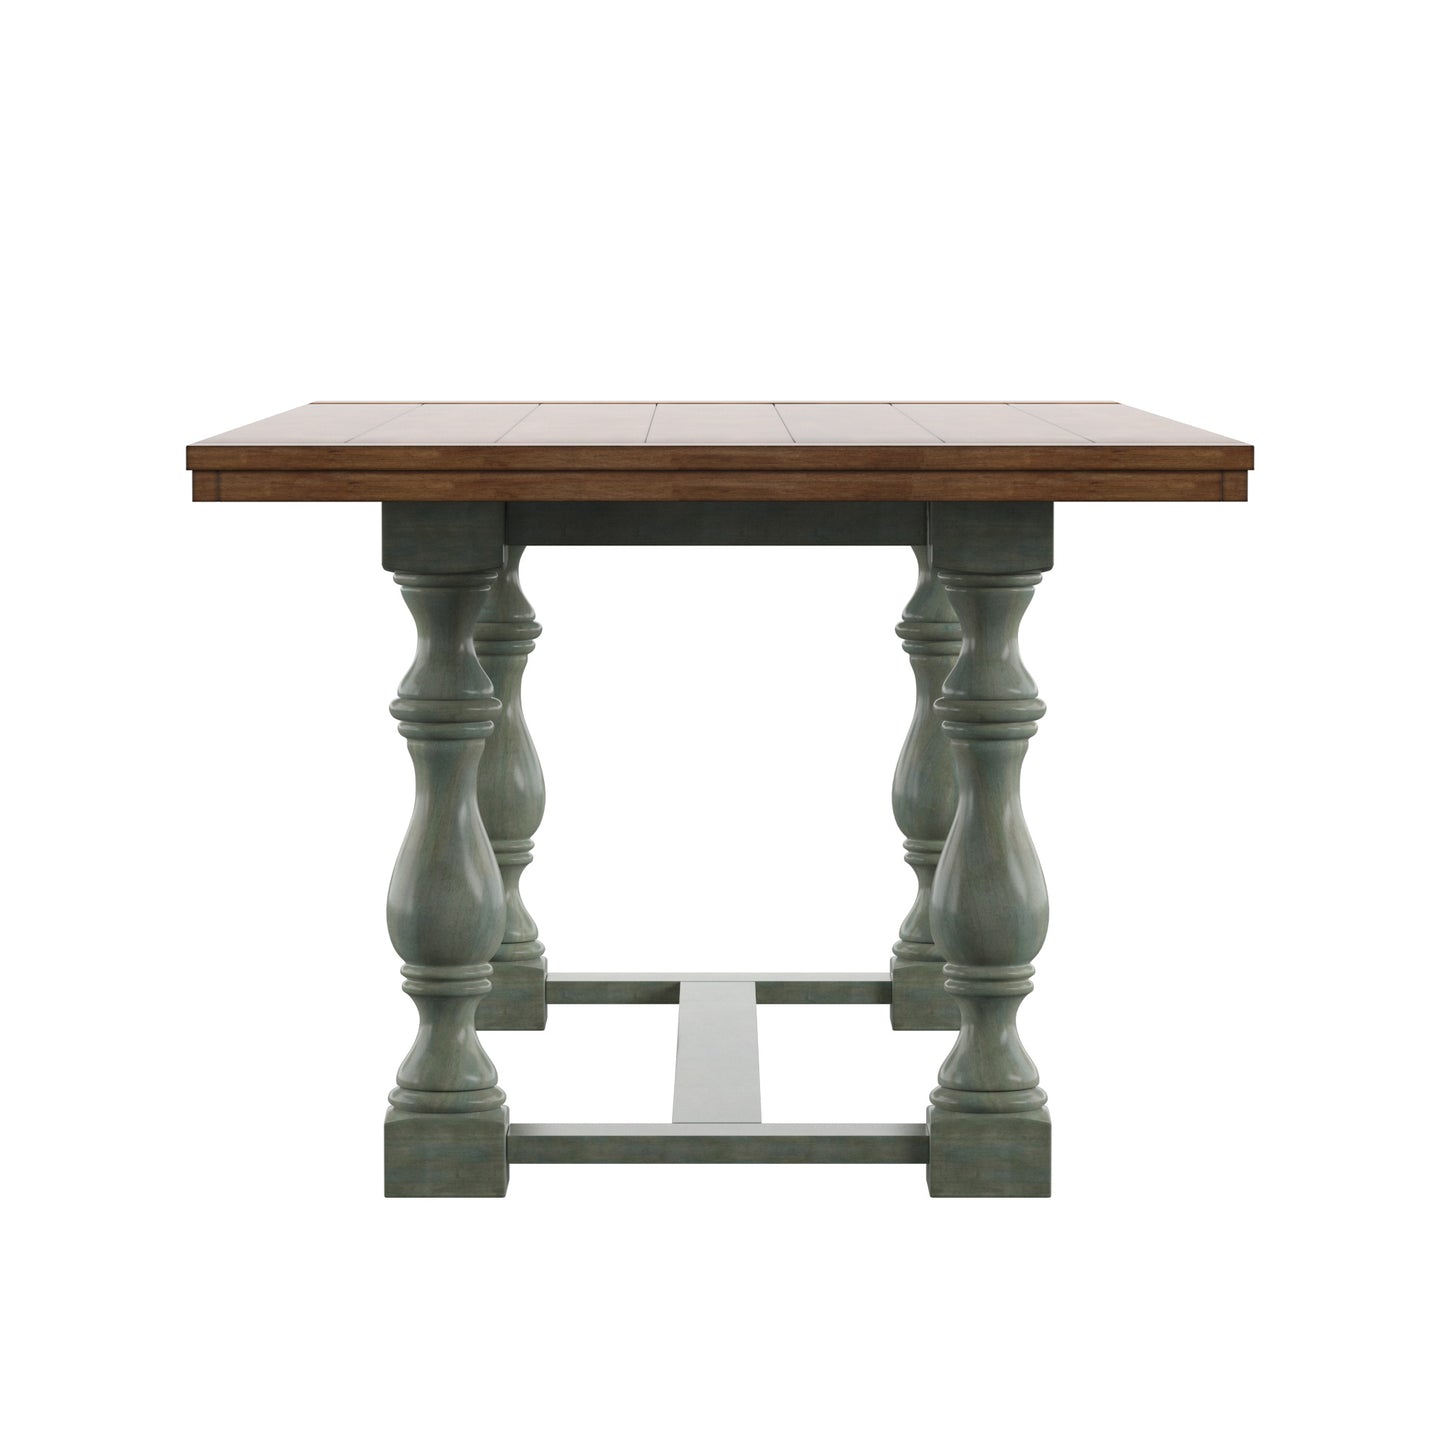 78-inch Oak Top Dining Table with Turned Leg Trestle Base - Oak Top with Antique Sage Green Base